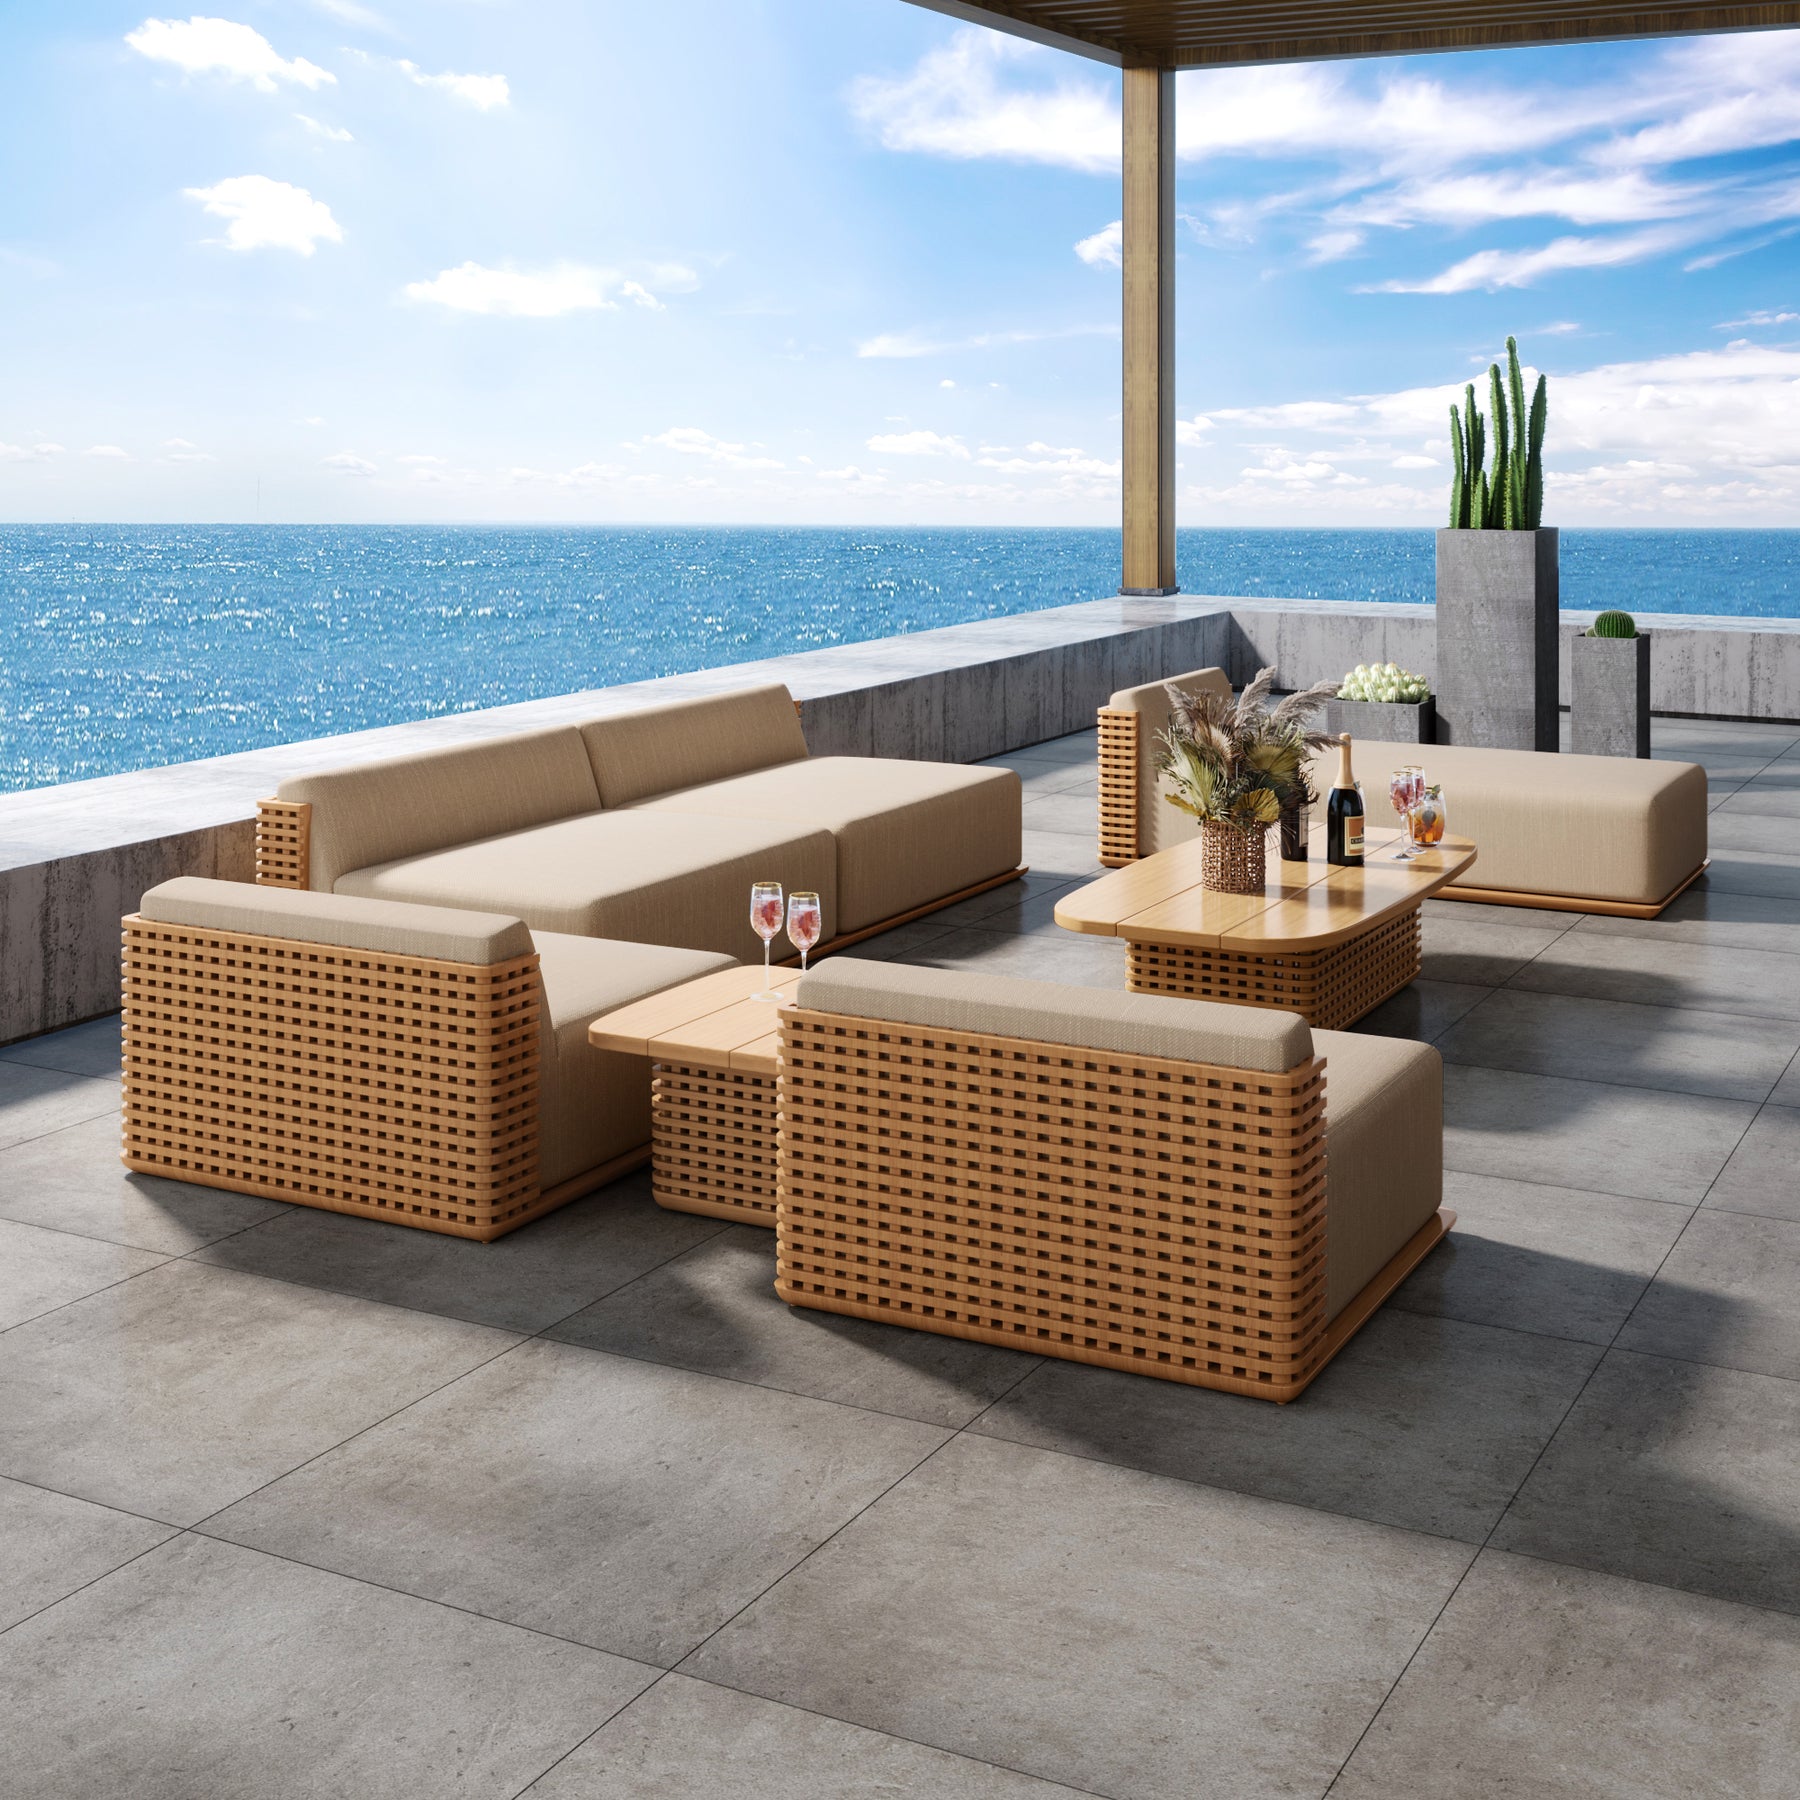 6 Pieces Outdoor Wood Sofas with Coffee Table